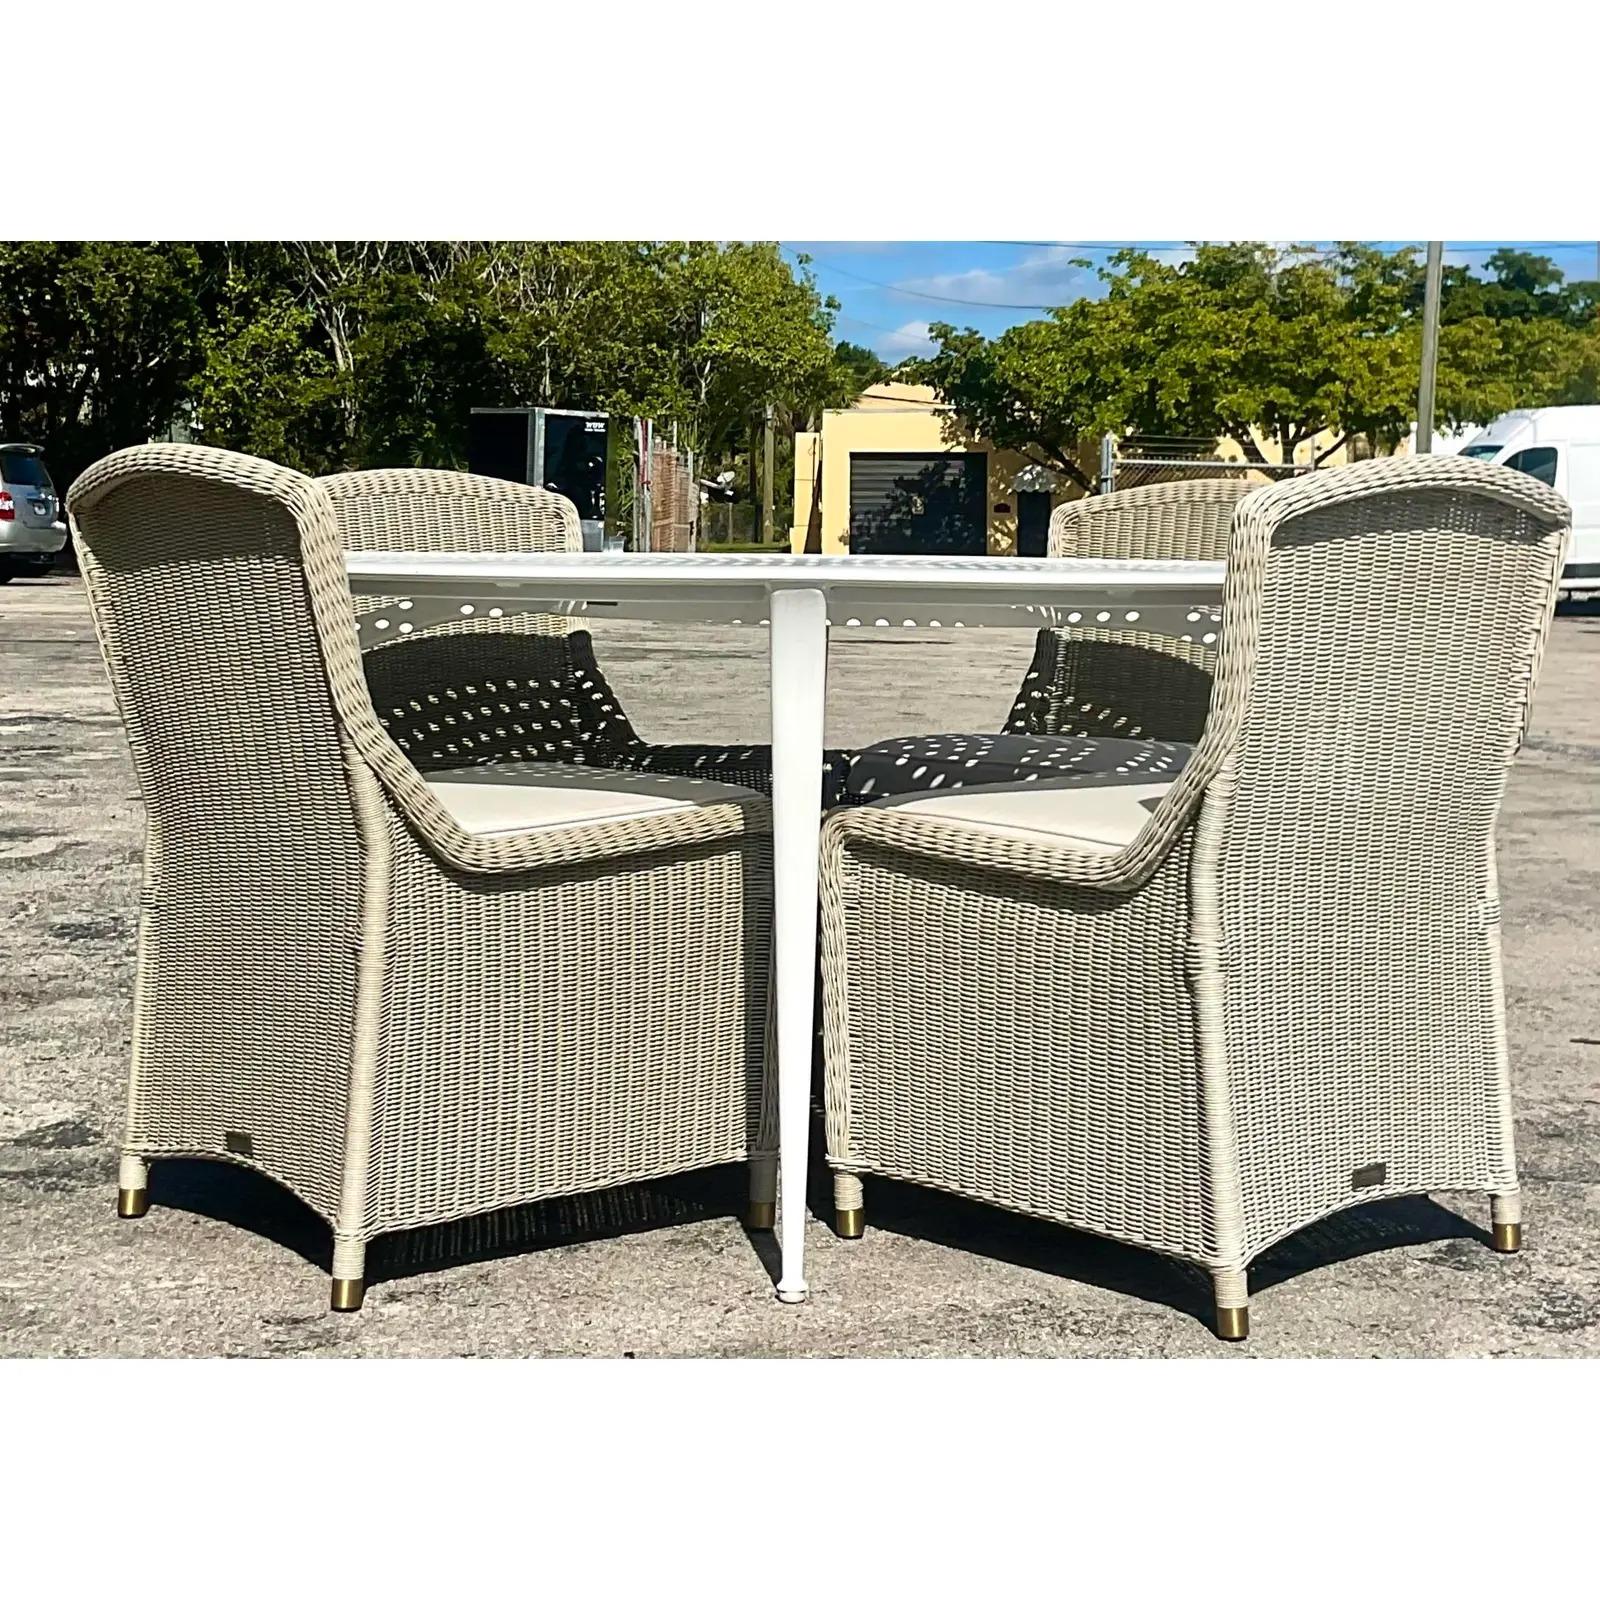 Resin Vintage Richard Frinier for Brown Jordan South Hampton Woven Dining Chairs For Sale